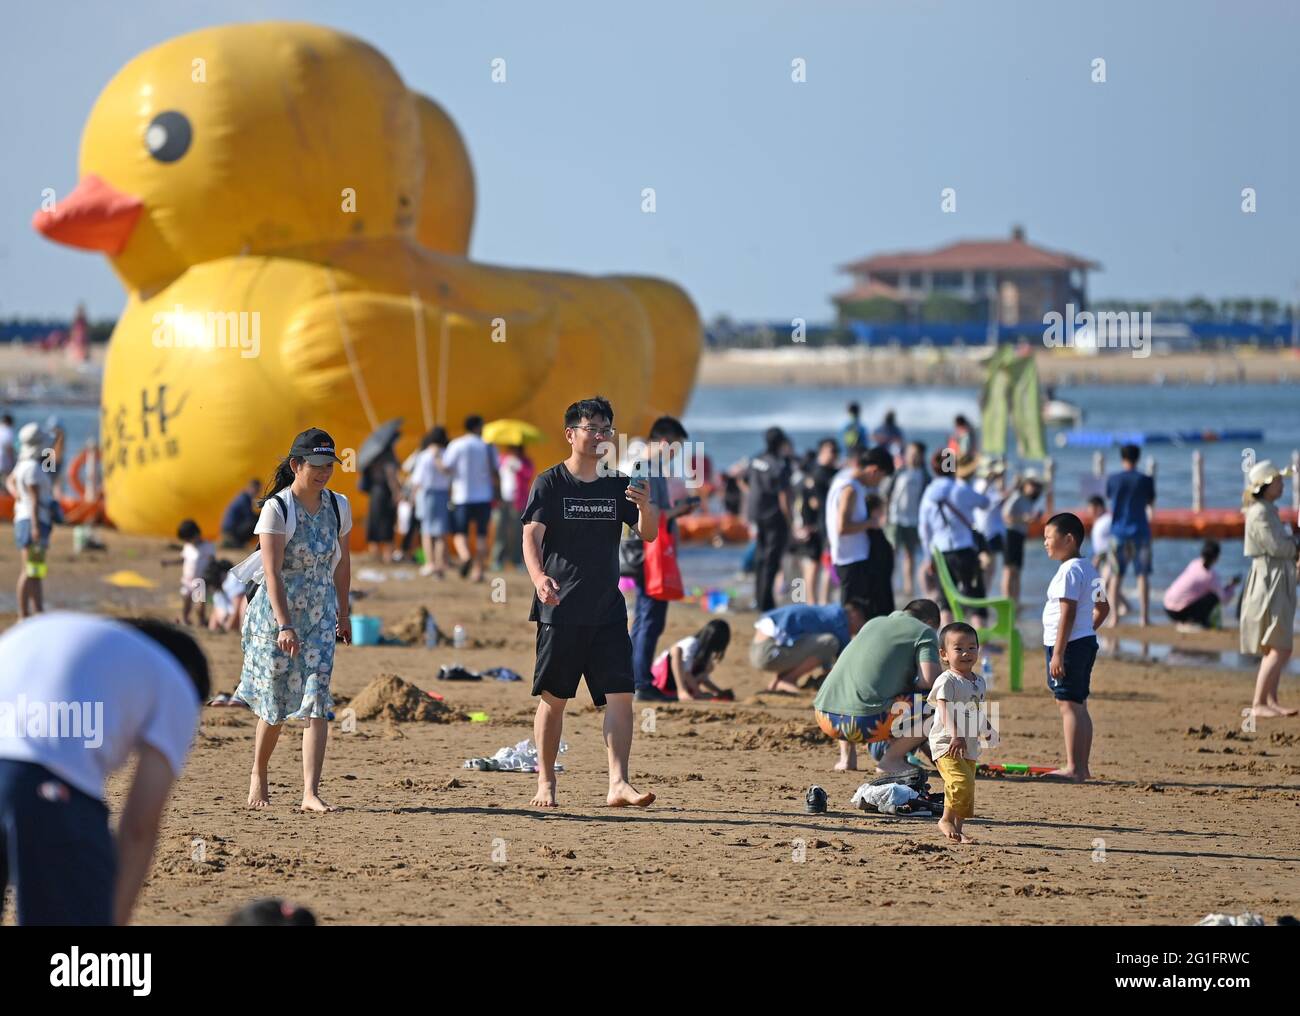 (210607) -- TIANJIN, June 7, 2021 (Xinhua) -- Tourists have fun at an artificial beach resort at Dongjiang Port in the Binhai New Area of north China's Tianjin, June 5, 2021. Tianjin in north China boasts rich biodiversity along a 153-km coastline made up of muddy tidal flats. Over the years, the city has worked on pollution control and shoreline management of the Bohai Sea to restore its coastal wetlands, while stricter measures on land reclamation have been implemented. In 2020, 70.4 percent of Tianjin's offshore waters achieved sound quality under a three-year action plan to battle wat Stock Photo